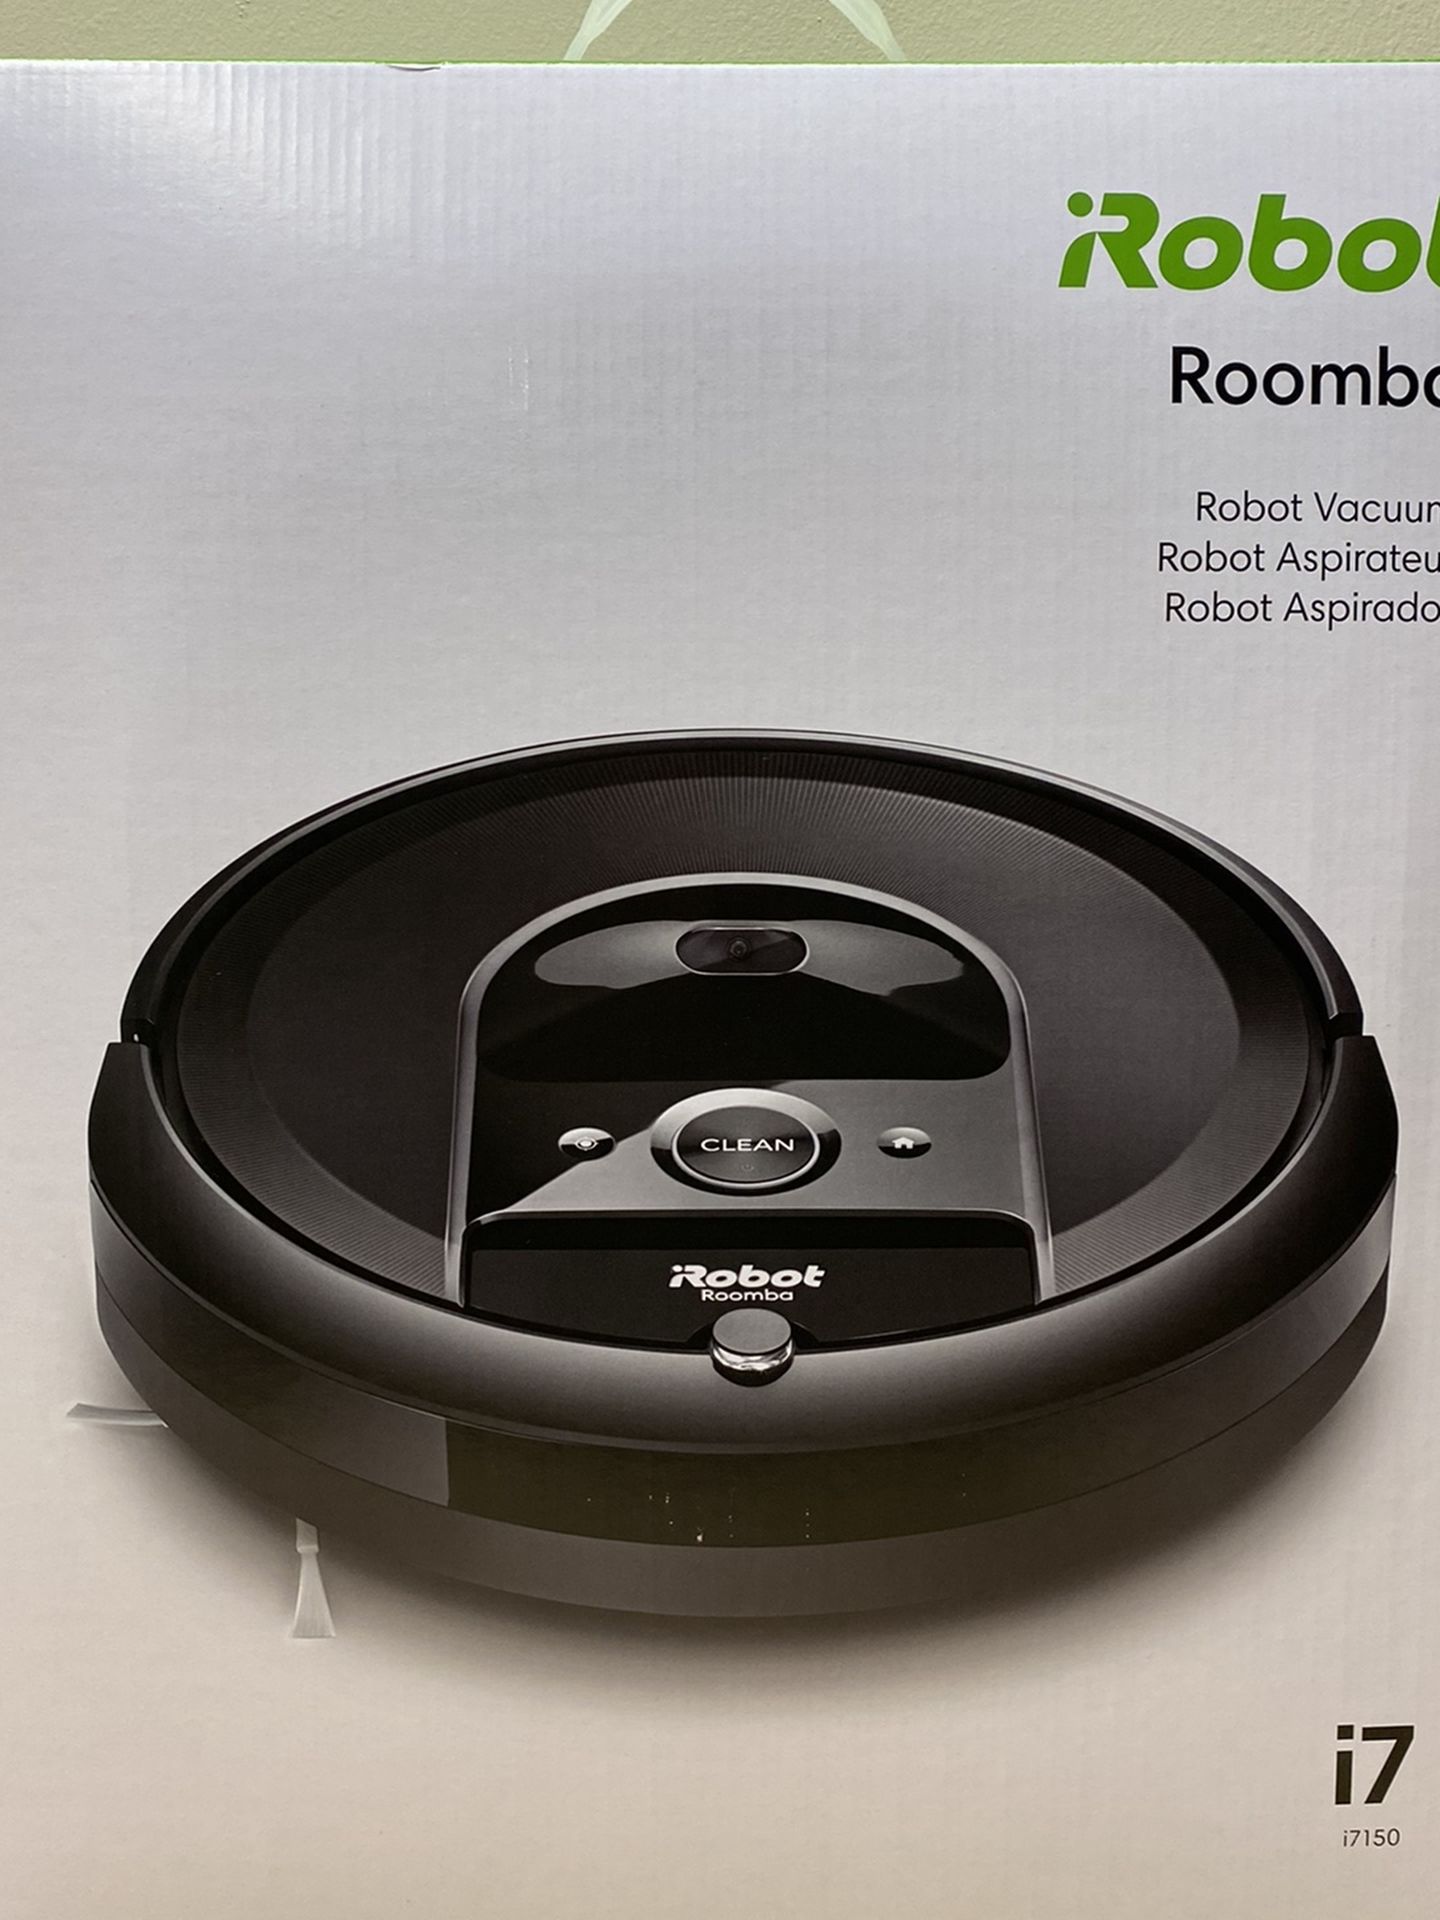 New! iRobot Roomba i7 (7150) Robot Vacuum- Wi-Fi Connected, Smart Mapping, Works with Alexa, Ideal for Pet Hair, Works With Clean Base